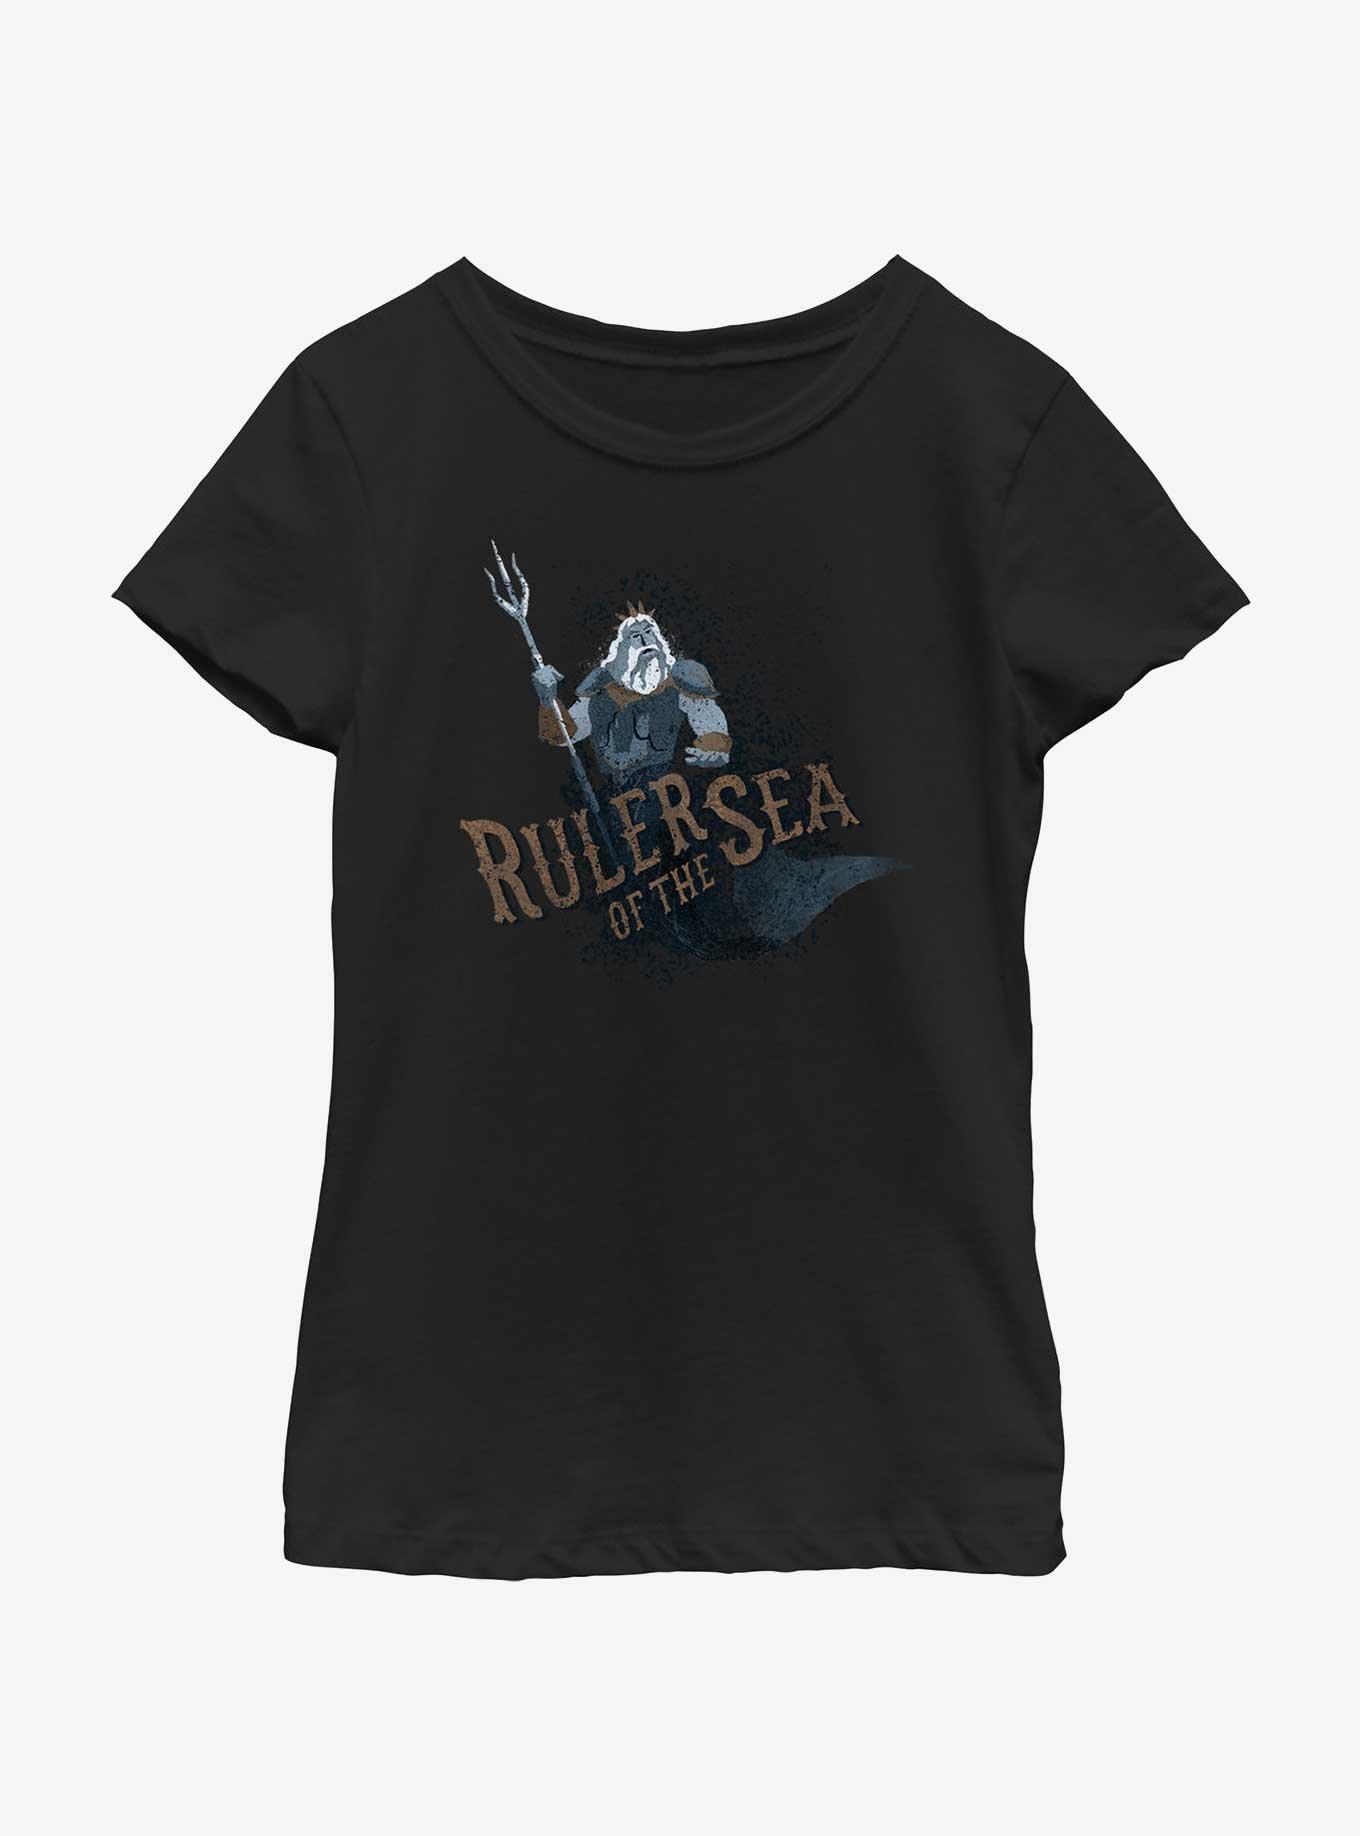 Disney The Little Mermaid Live Action Ruler of the Sea Youth Girls T-Shirt, BLACK, hi-res